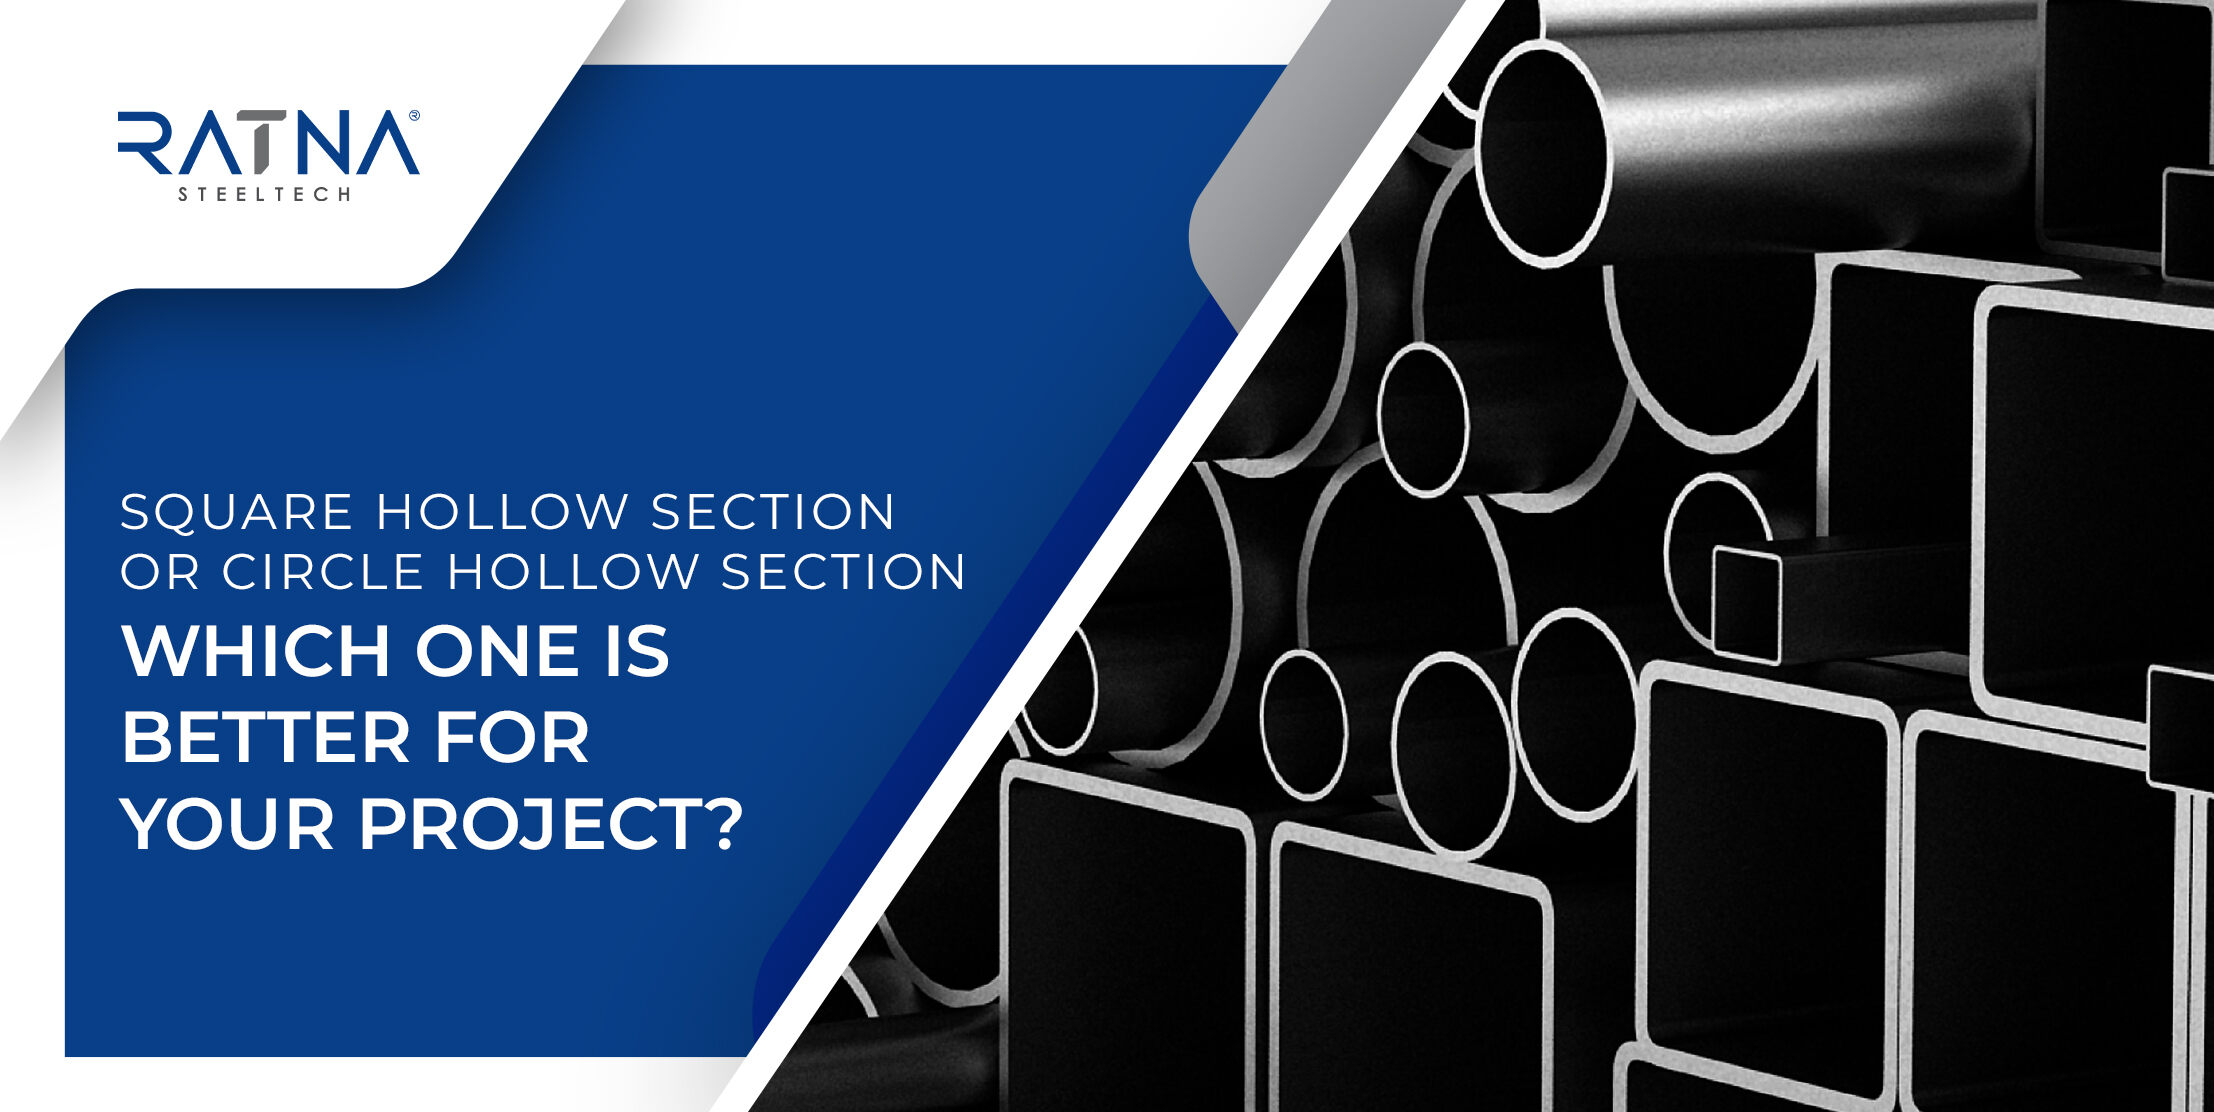 Square Hollow Section or Circle Hollow Section: Which one is Better for your Project?